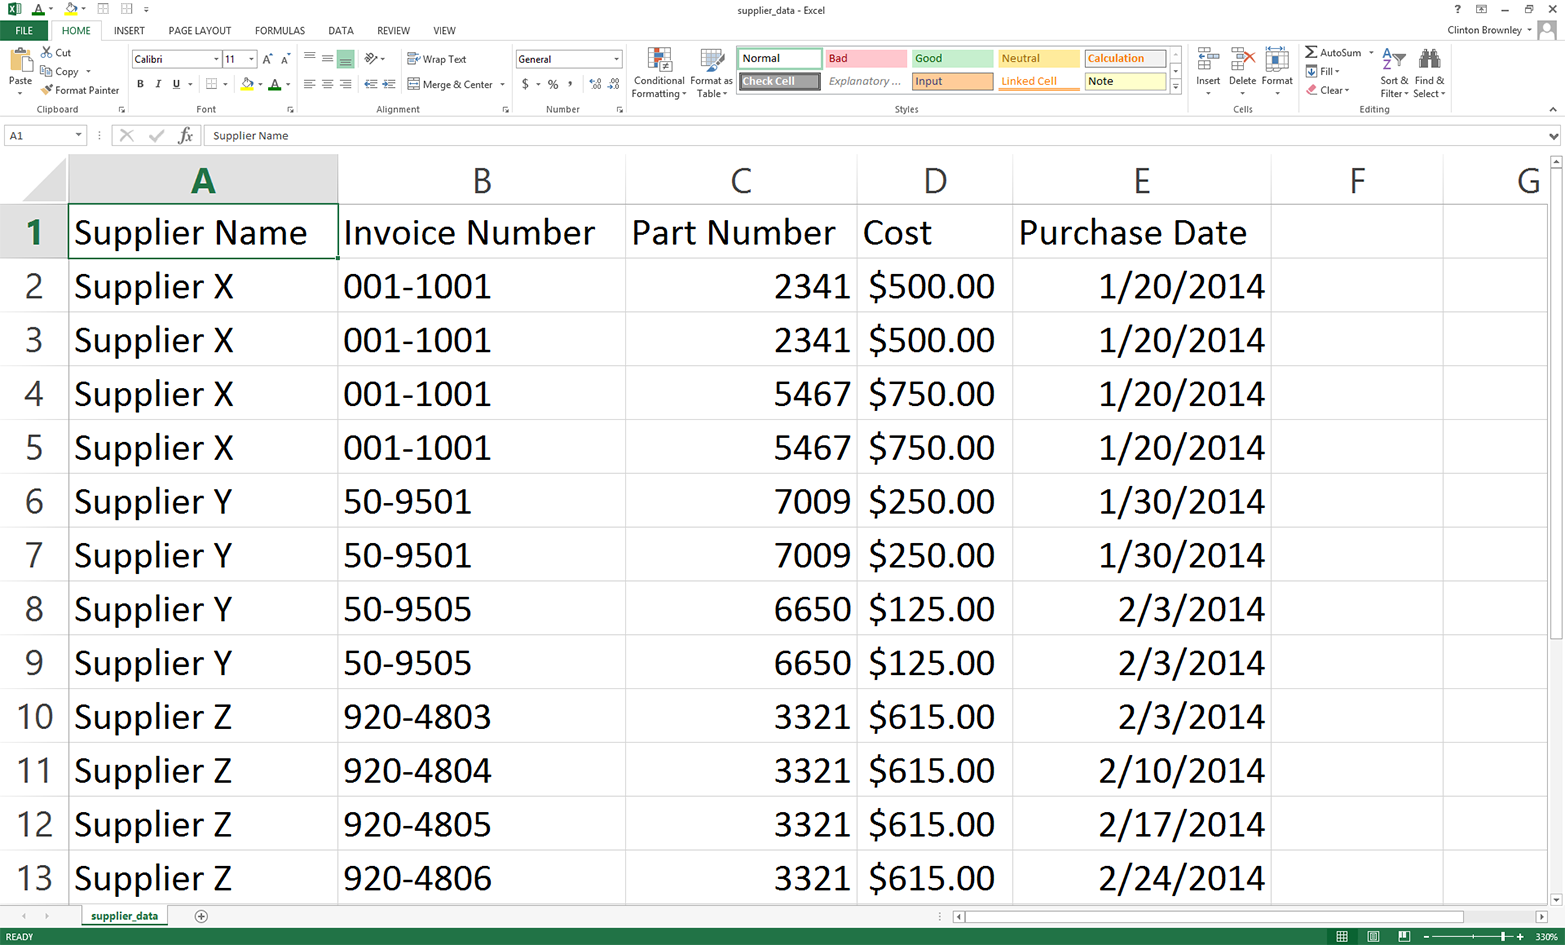 Example data for a CSV file named supplier_data.csv, displayed in an Excel worksheet